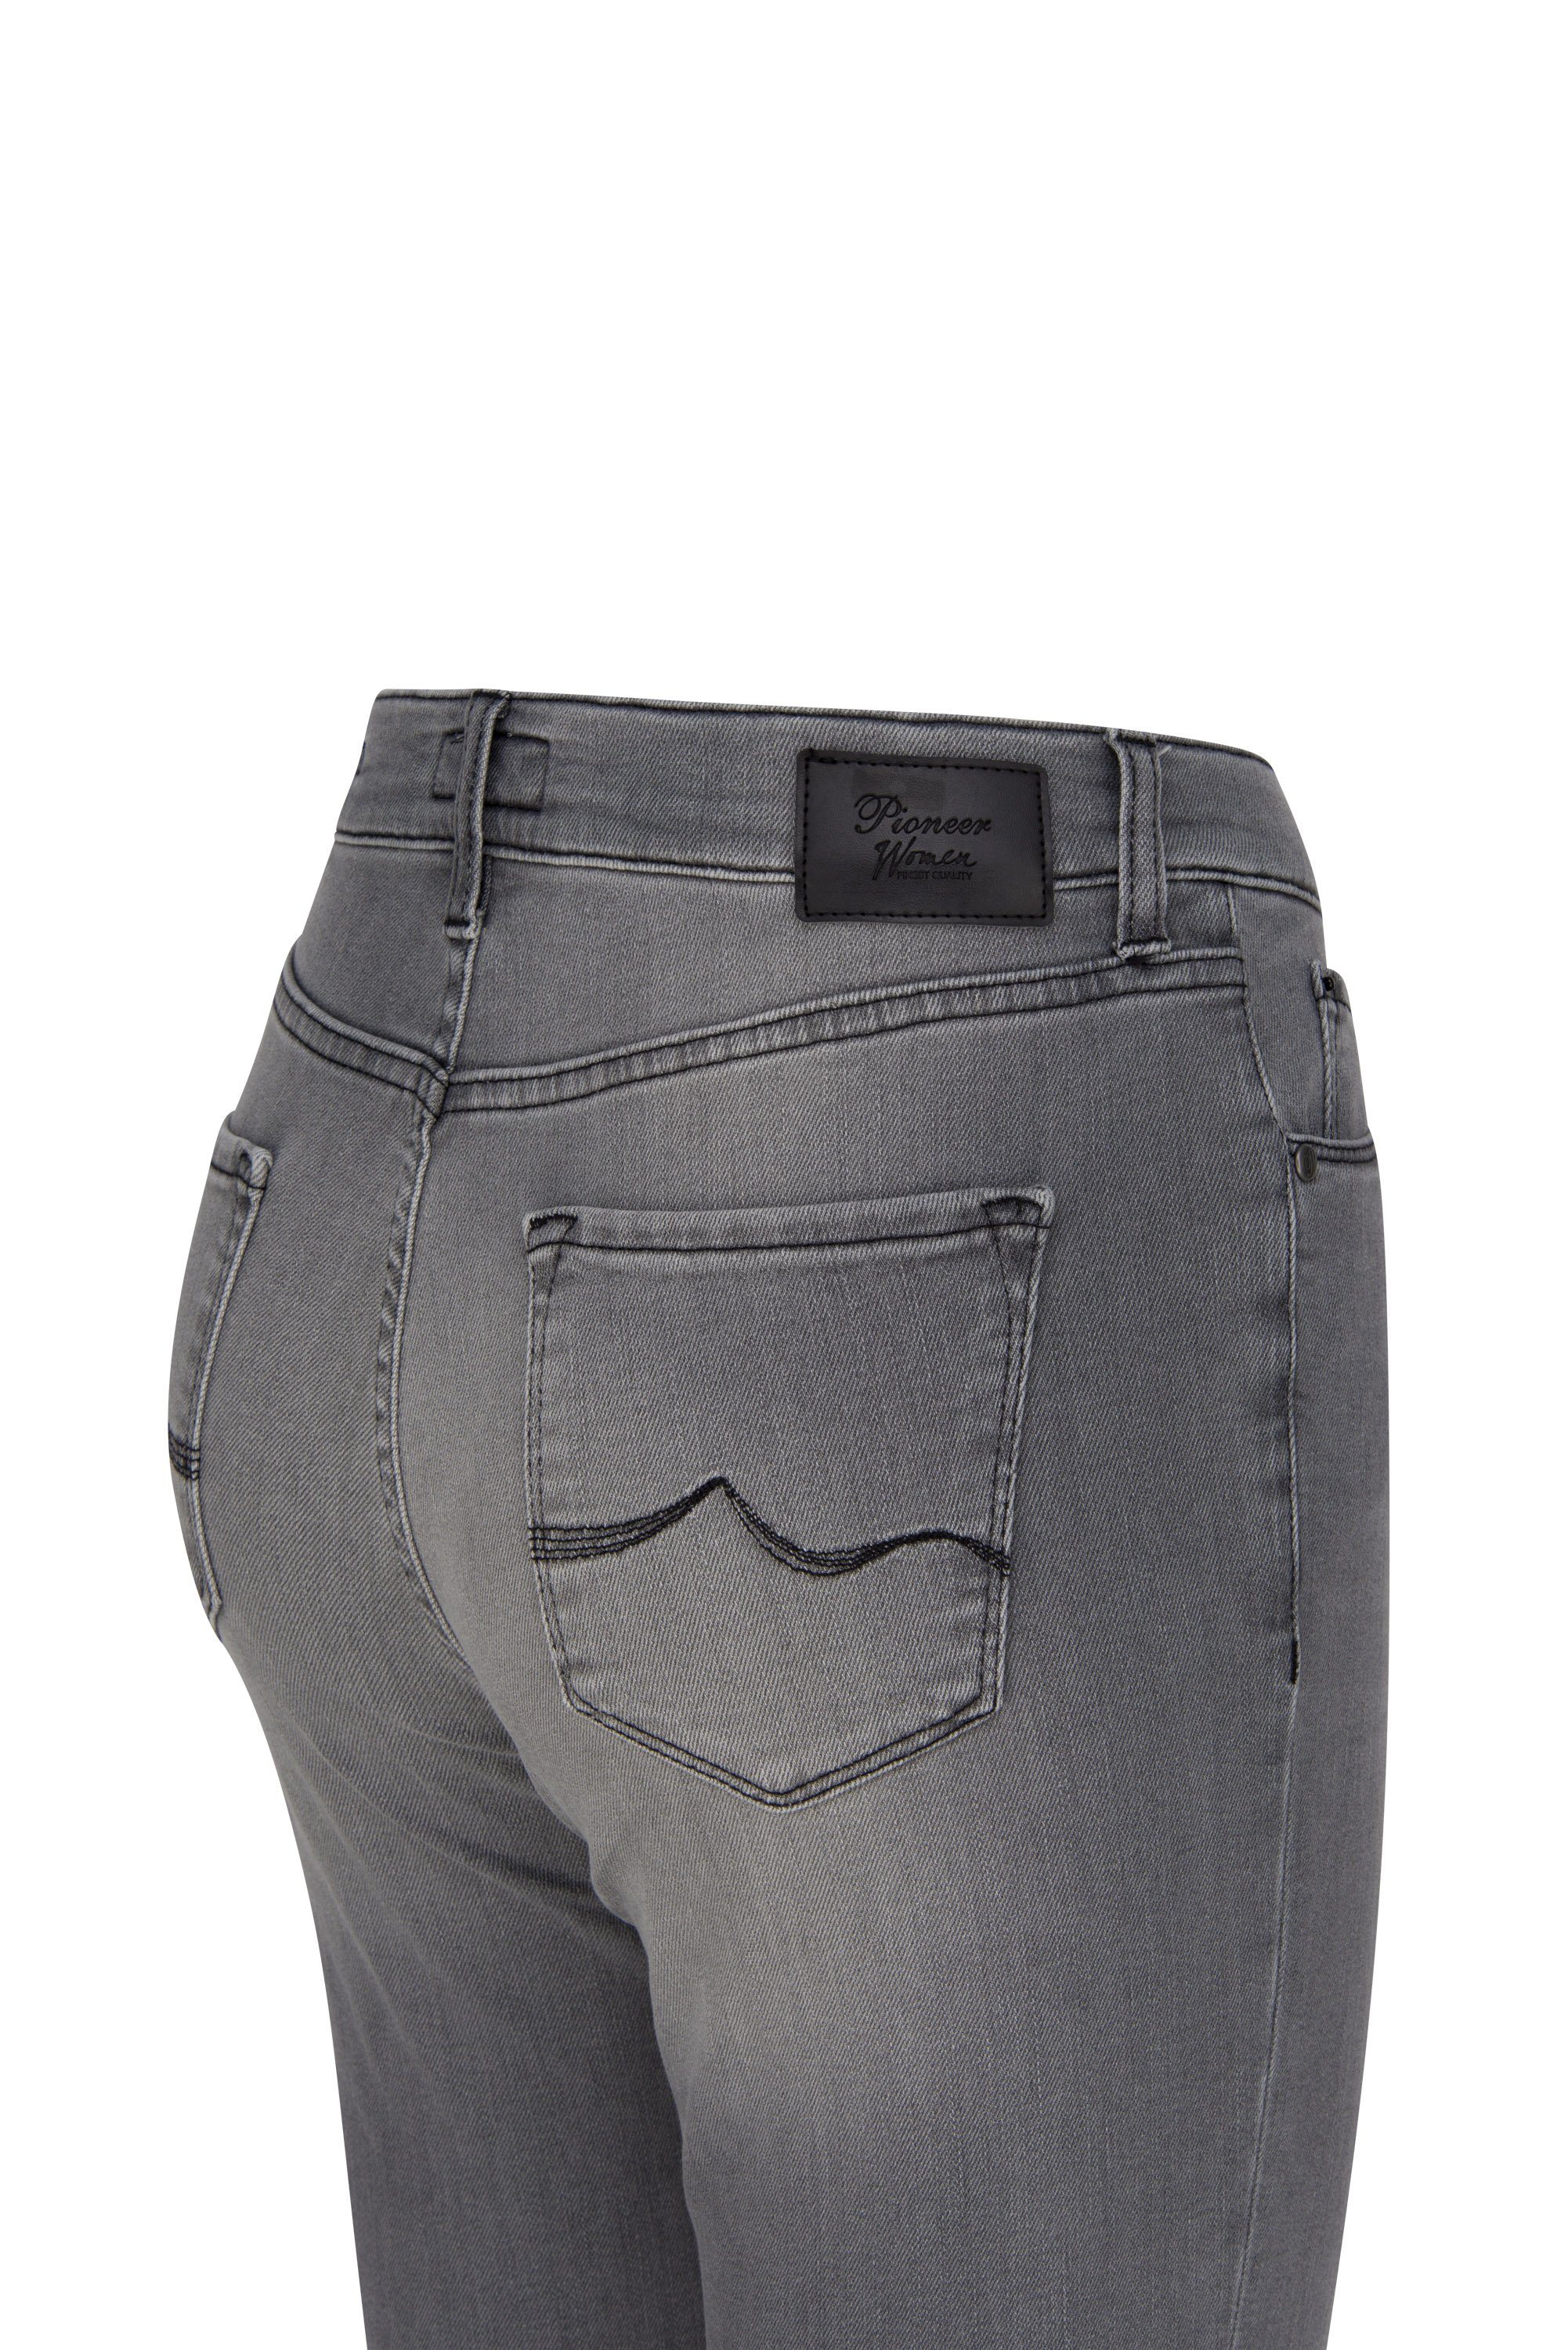 KATY - Stretch-Jeans buffies used PIONEER grey 3011 POWERSTRETCH Authentic Jeans Pioneer 5012.9834